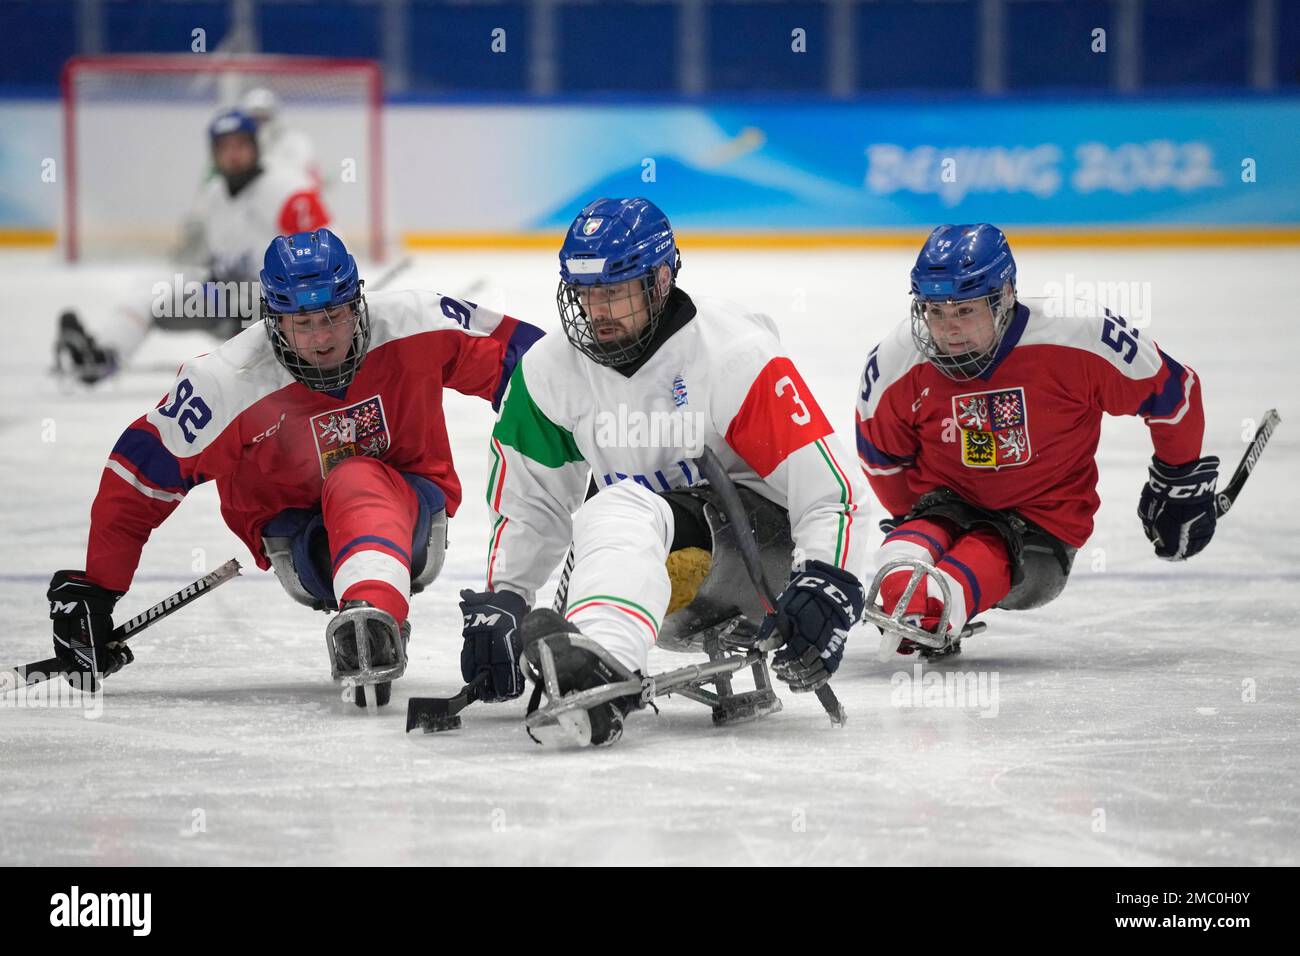 Italy's Gianluigi Rosa, center, battles for the puck against Czech  Republic's Patrik Sedlacek,left, and Filip Vesely during their para ice  hockey match for the fifth place at the 2022 Winter Paralympics, Friday,